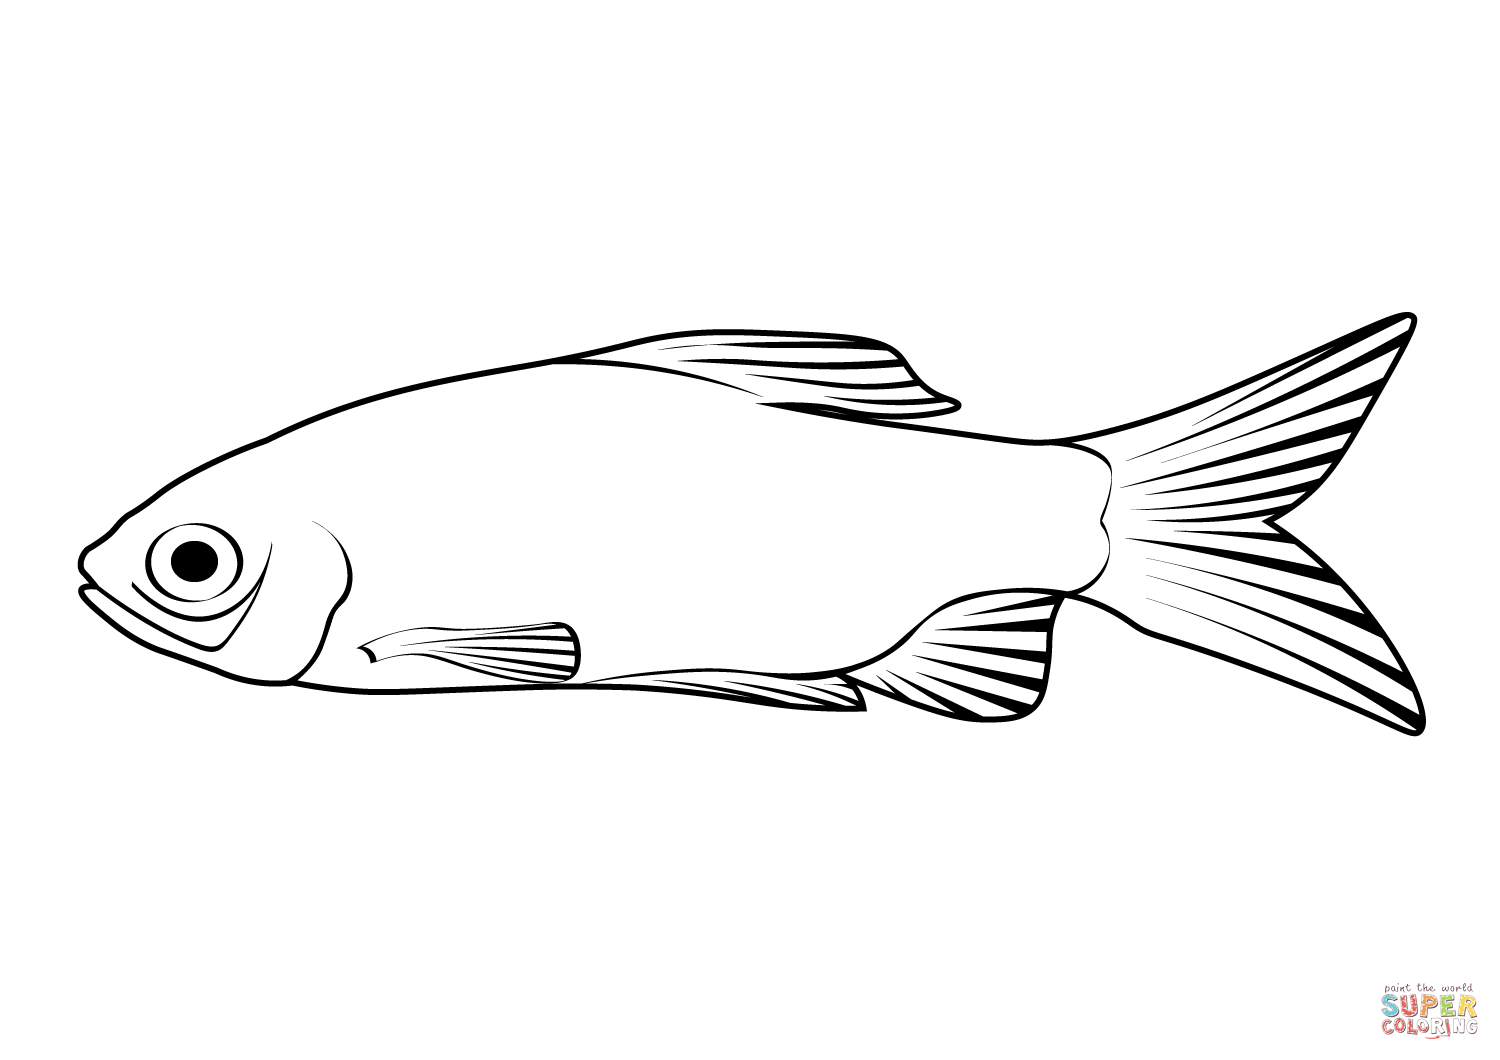 Rosy barb pethia conchonius coloring page free printable coloring pages